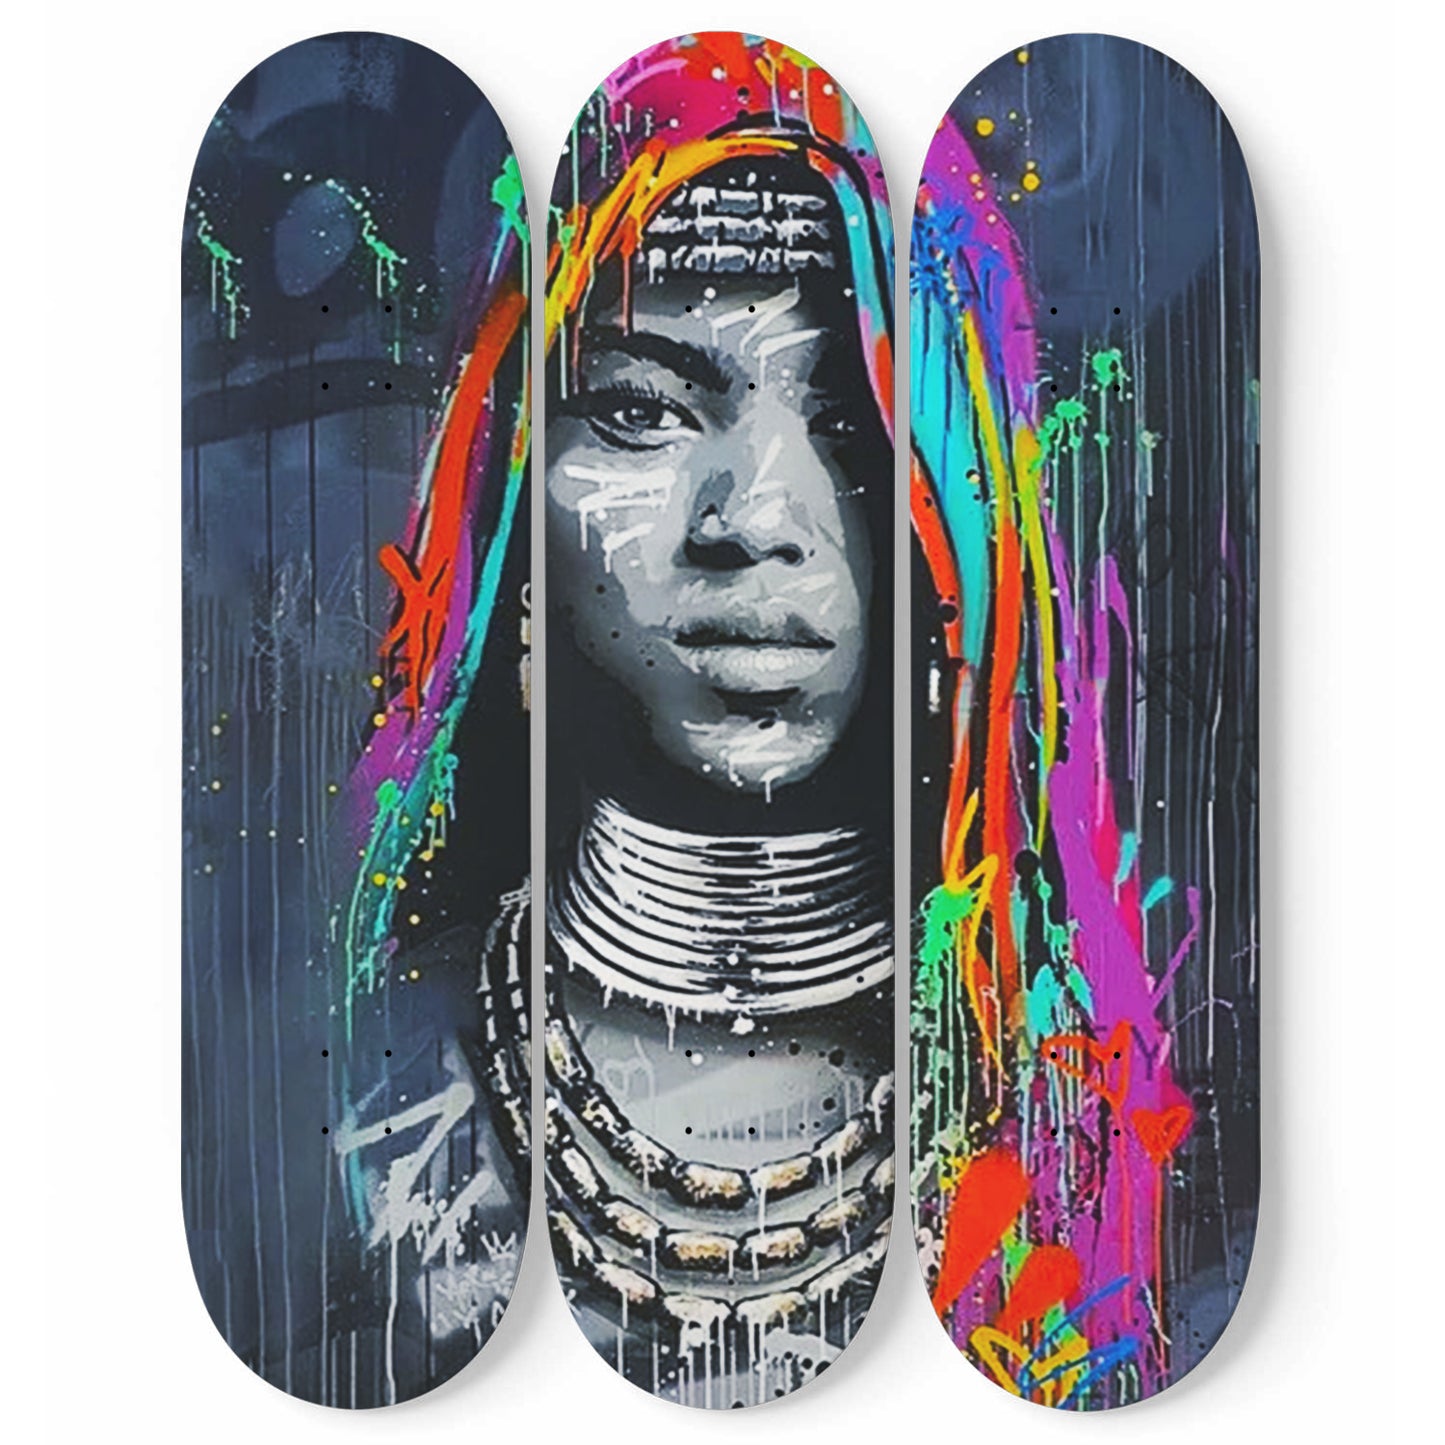 Ethnic Woman Print | 3 - Piece Skateboard Wall Art, African Woman With Colorful Hair, Pro - Grade Maple Wood Wall Mount Hanging